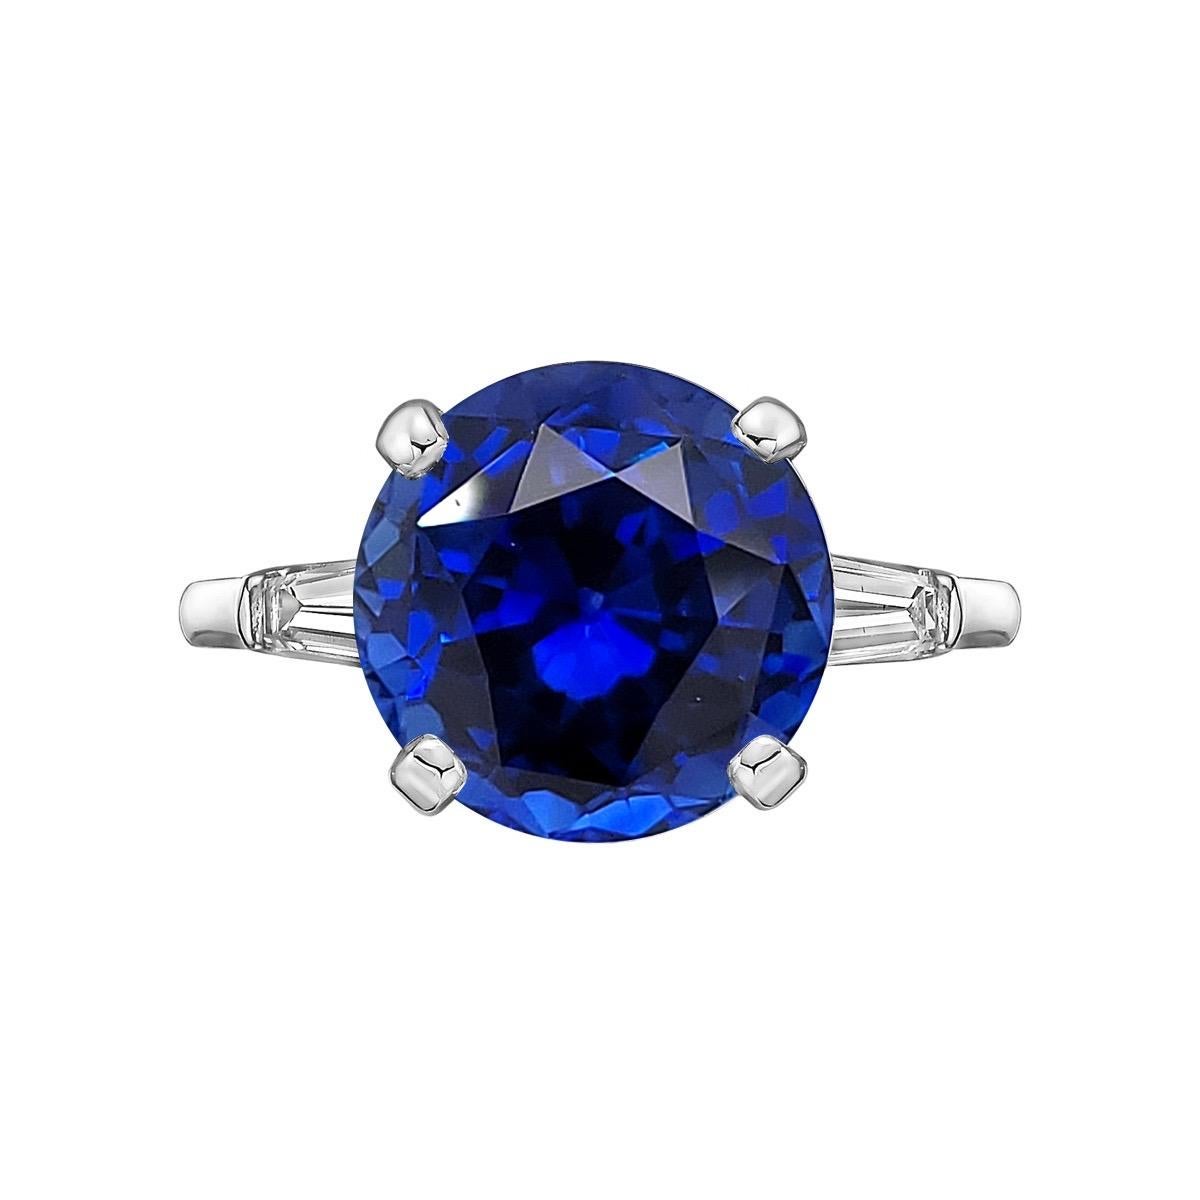 From The Vault At Emilio Jewelry New York,
A rare round cut ceylon sapphire with Royal blue color set in this very elegant simple ring. Approximate total weight 8cts please inquire for more information. 
You will love this ring, a must see! Private